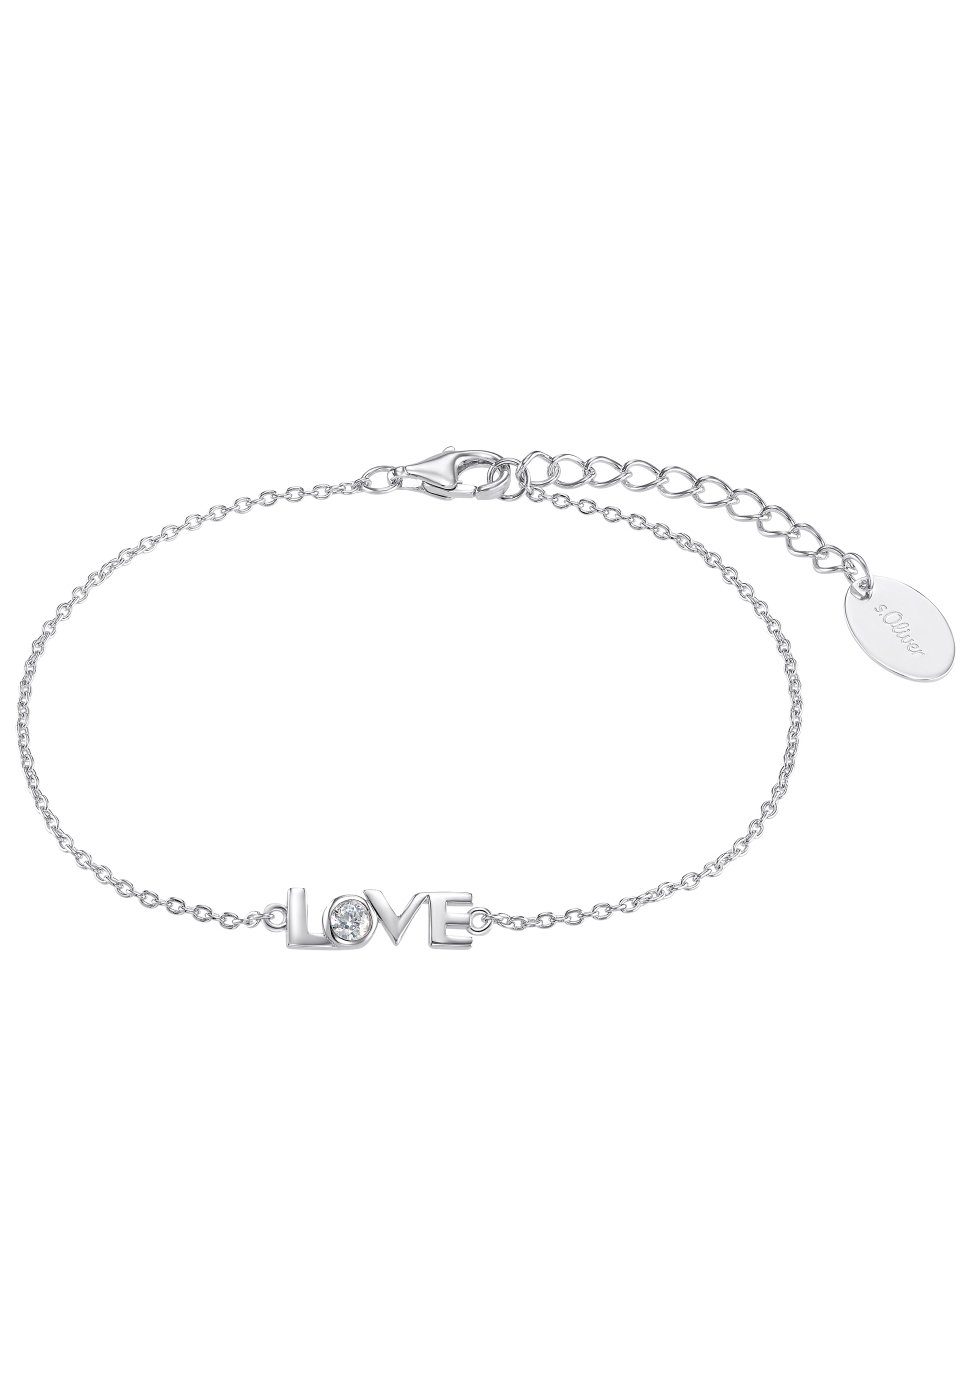 s.Oliver Armband LOVE, mit 2034344, Zirkonia (synth)